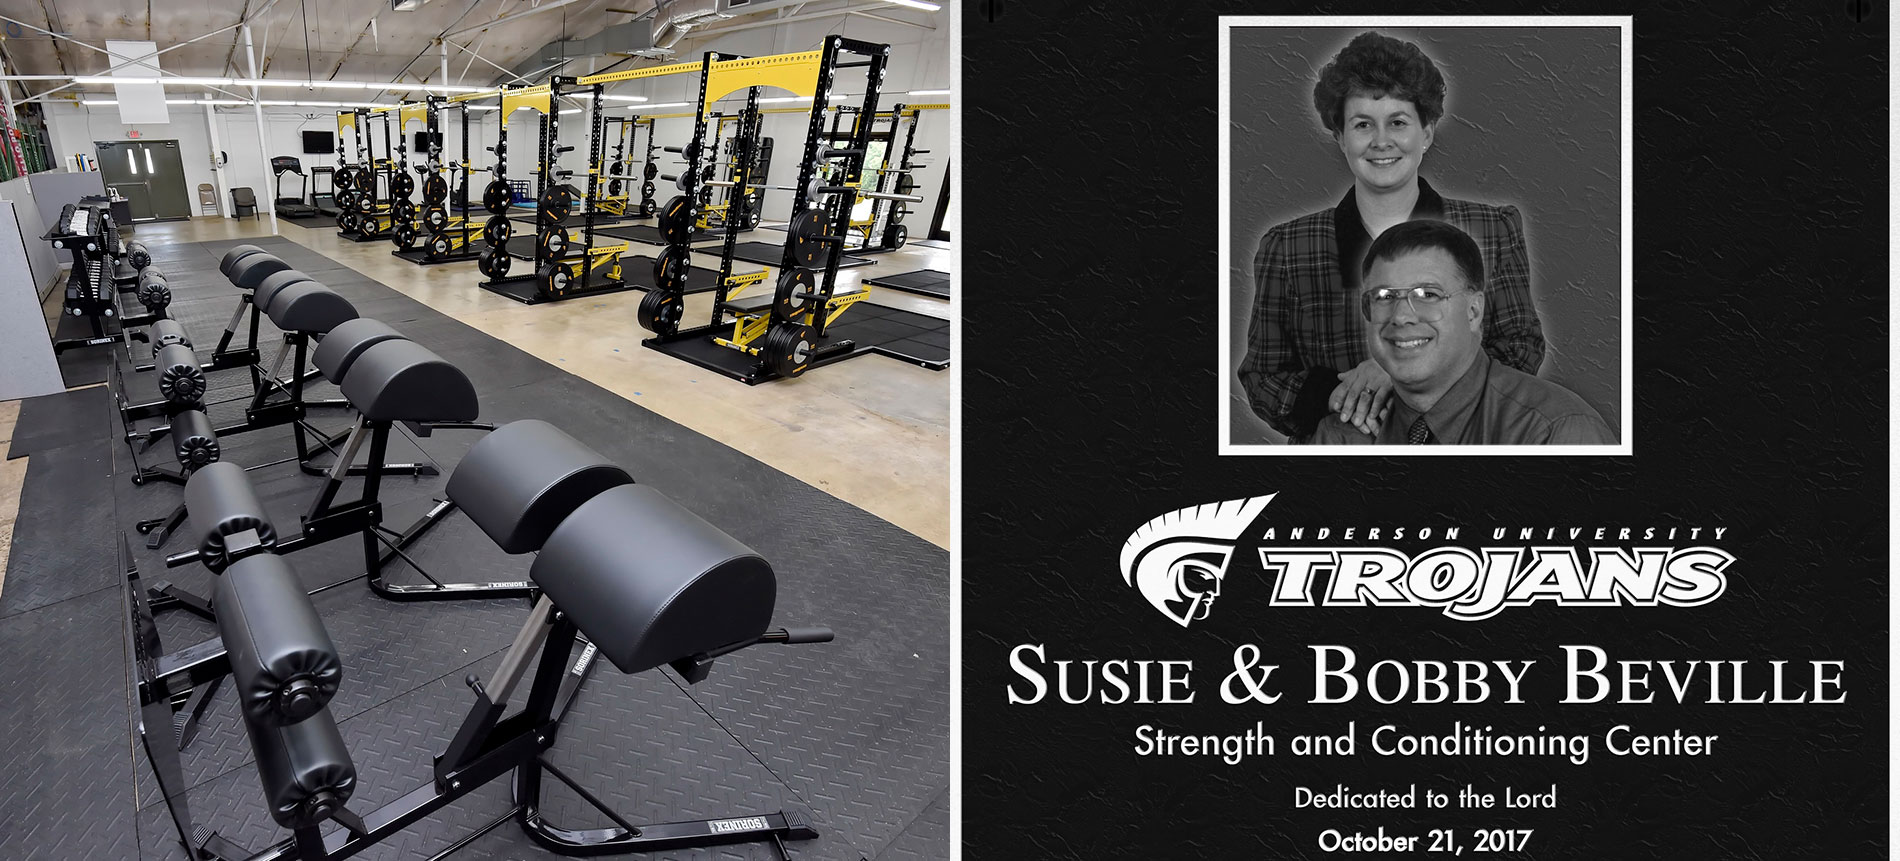 Athletics to Dedicate Strength and Conditioning Facility in Honor of Susie and Bobby Beville